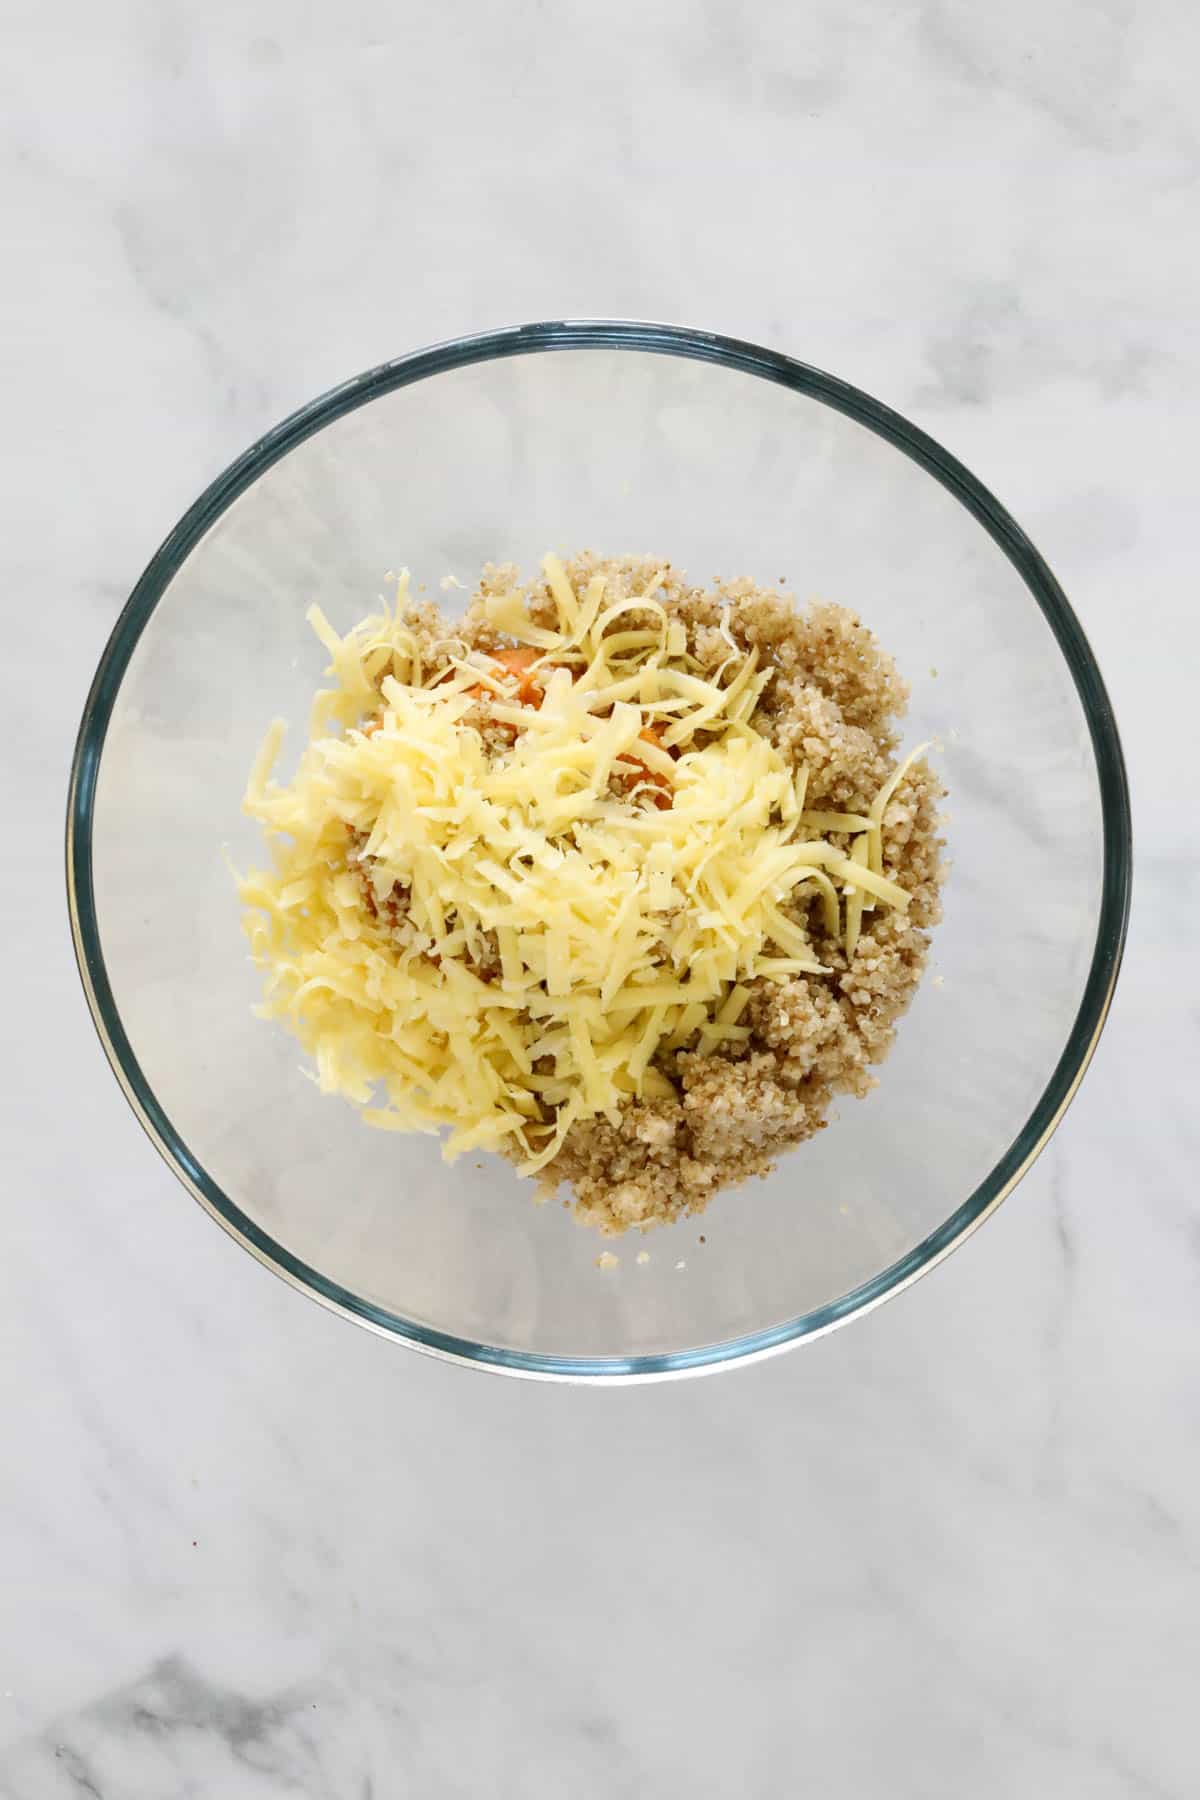 Cold mashed sweet potato, cooked quinoa and grated cheese in a bowl.